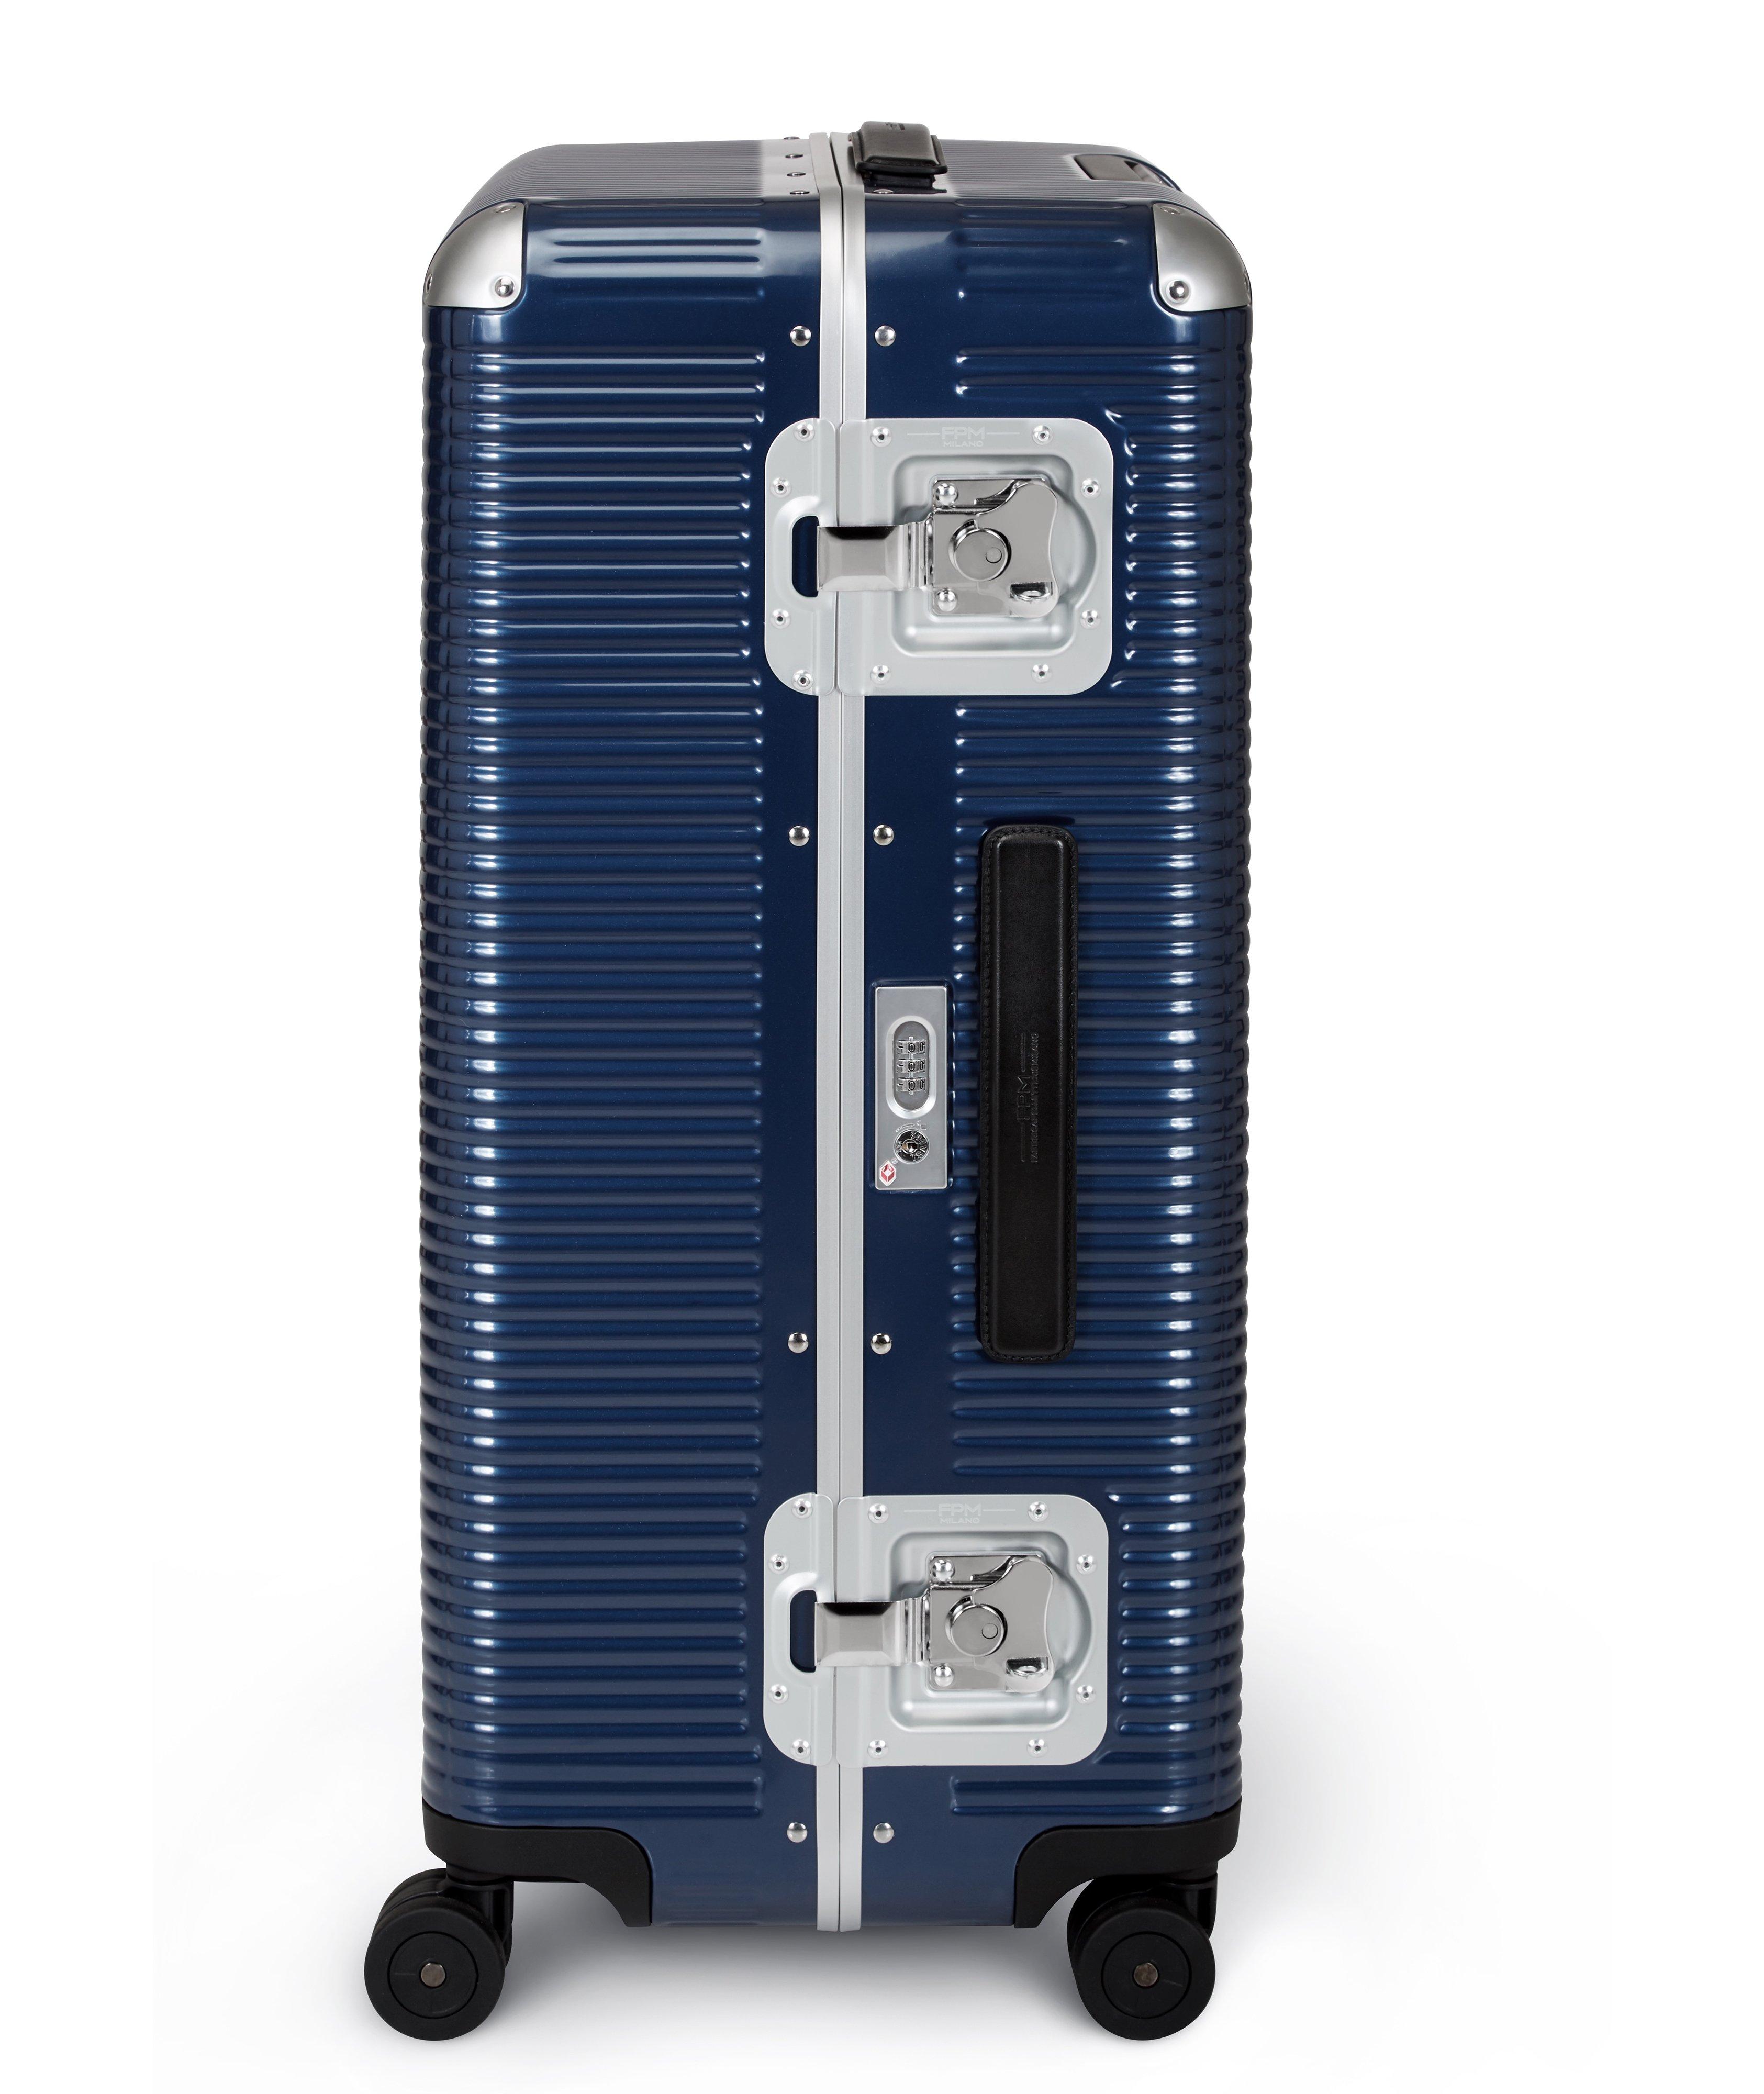 Bank Light Trunk On Wheels Polycarbonate Luggage image 1